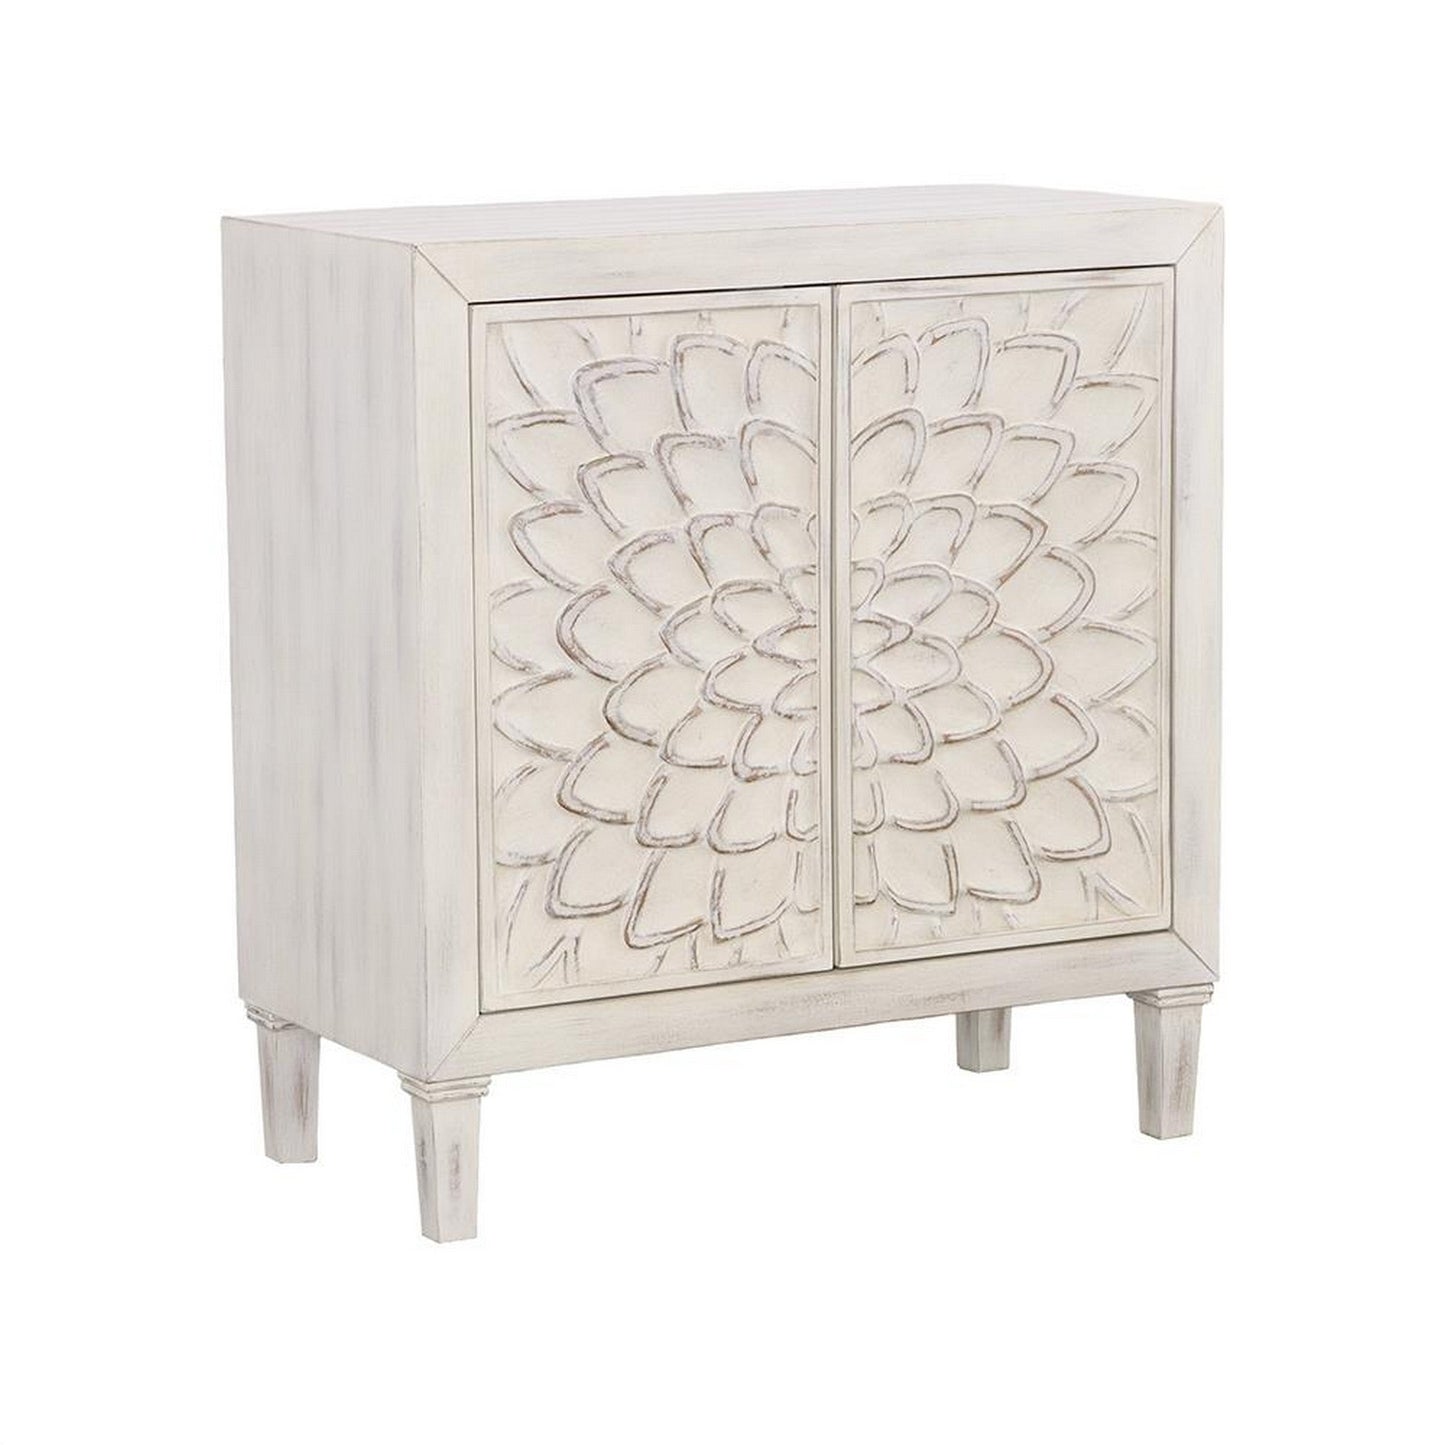 2 Door Wooden Accent Cabinet with Floral Carving Distressed Whitewash By Casagear Home BM233234